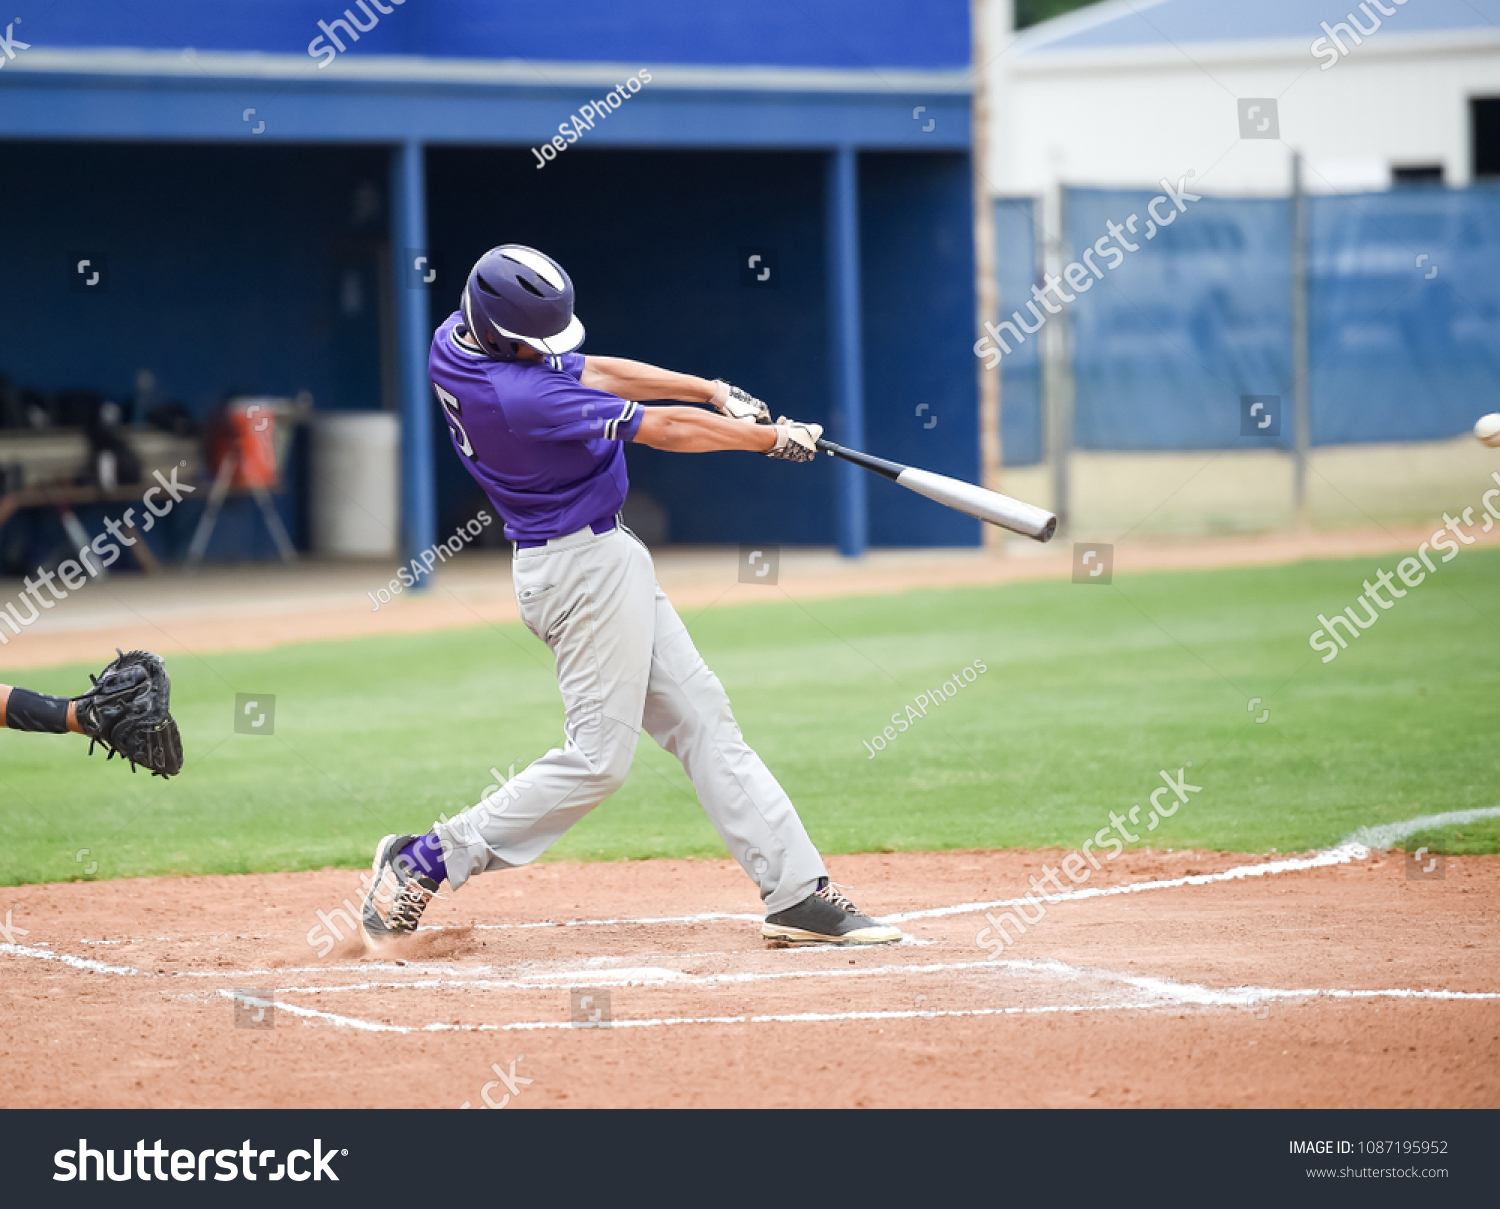 baseball players in action